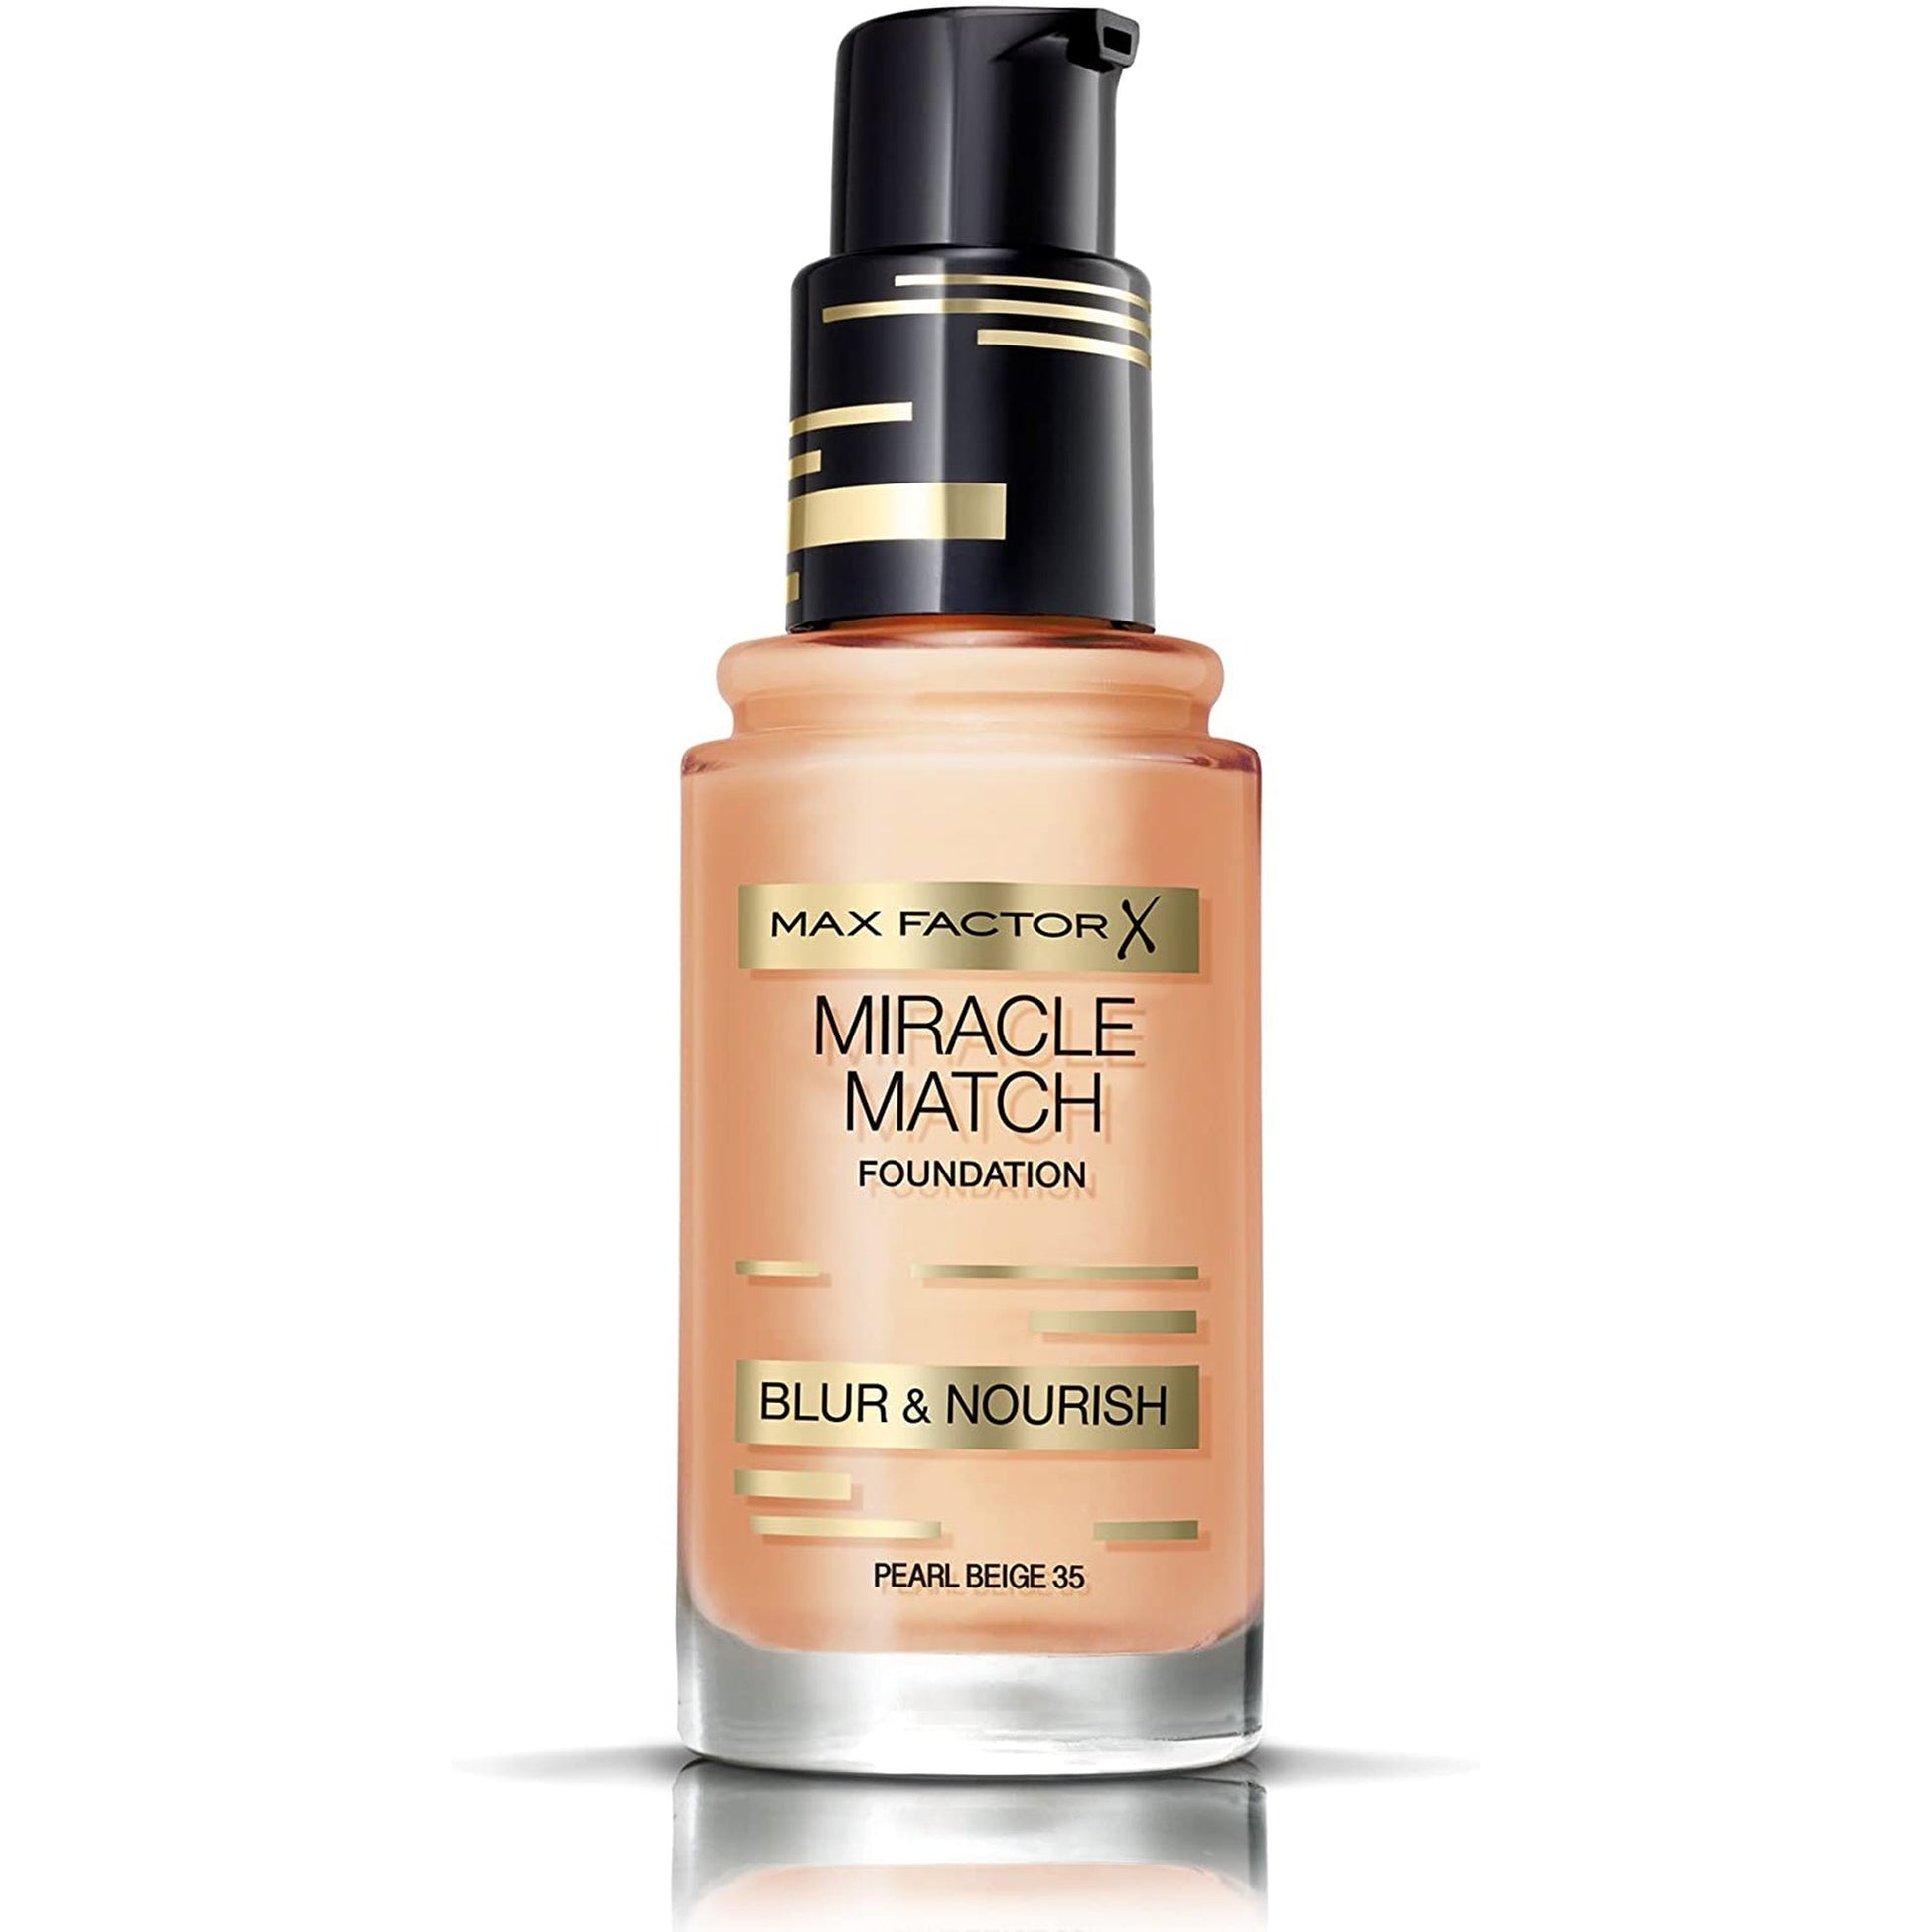 Max Factor Miracle Match Blur & Nourish Foundation - Pearl Beige 35-Max Factor-BeautyNmakeup.co.uk